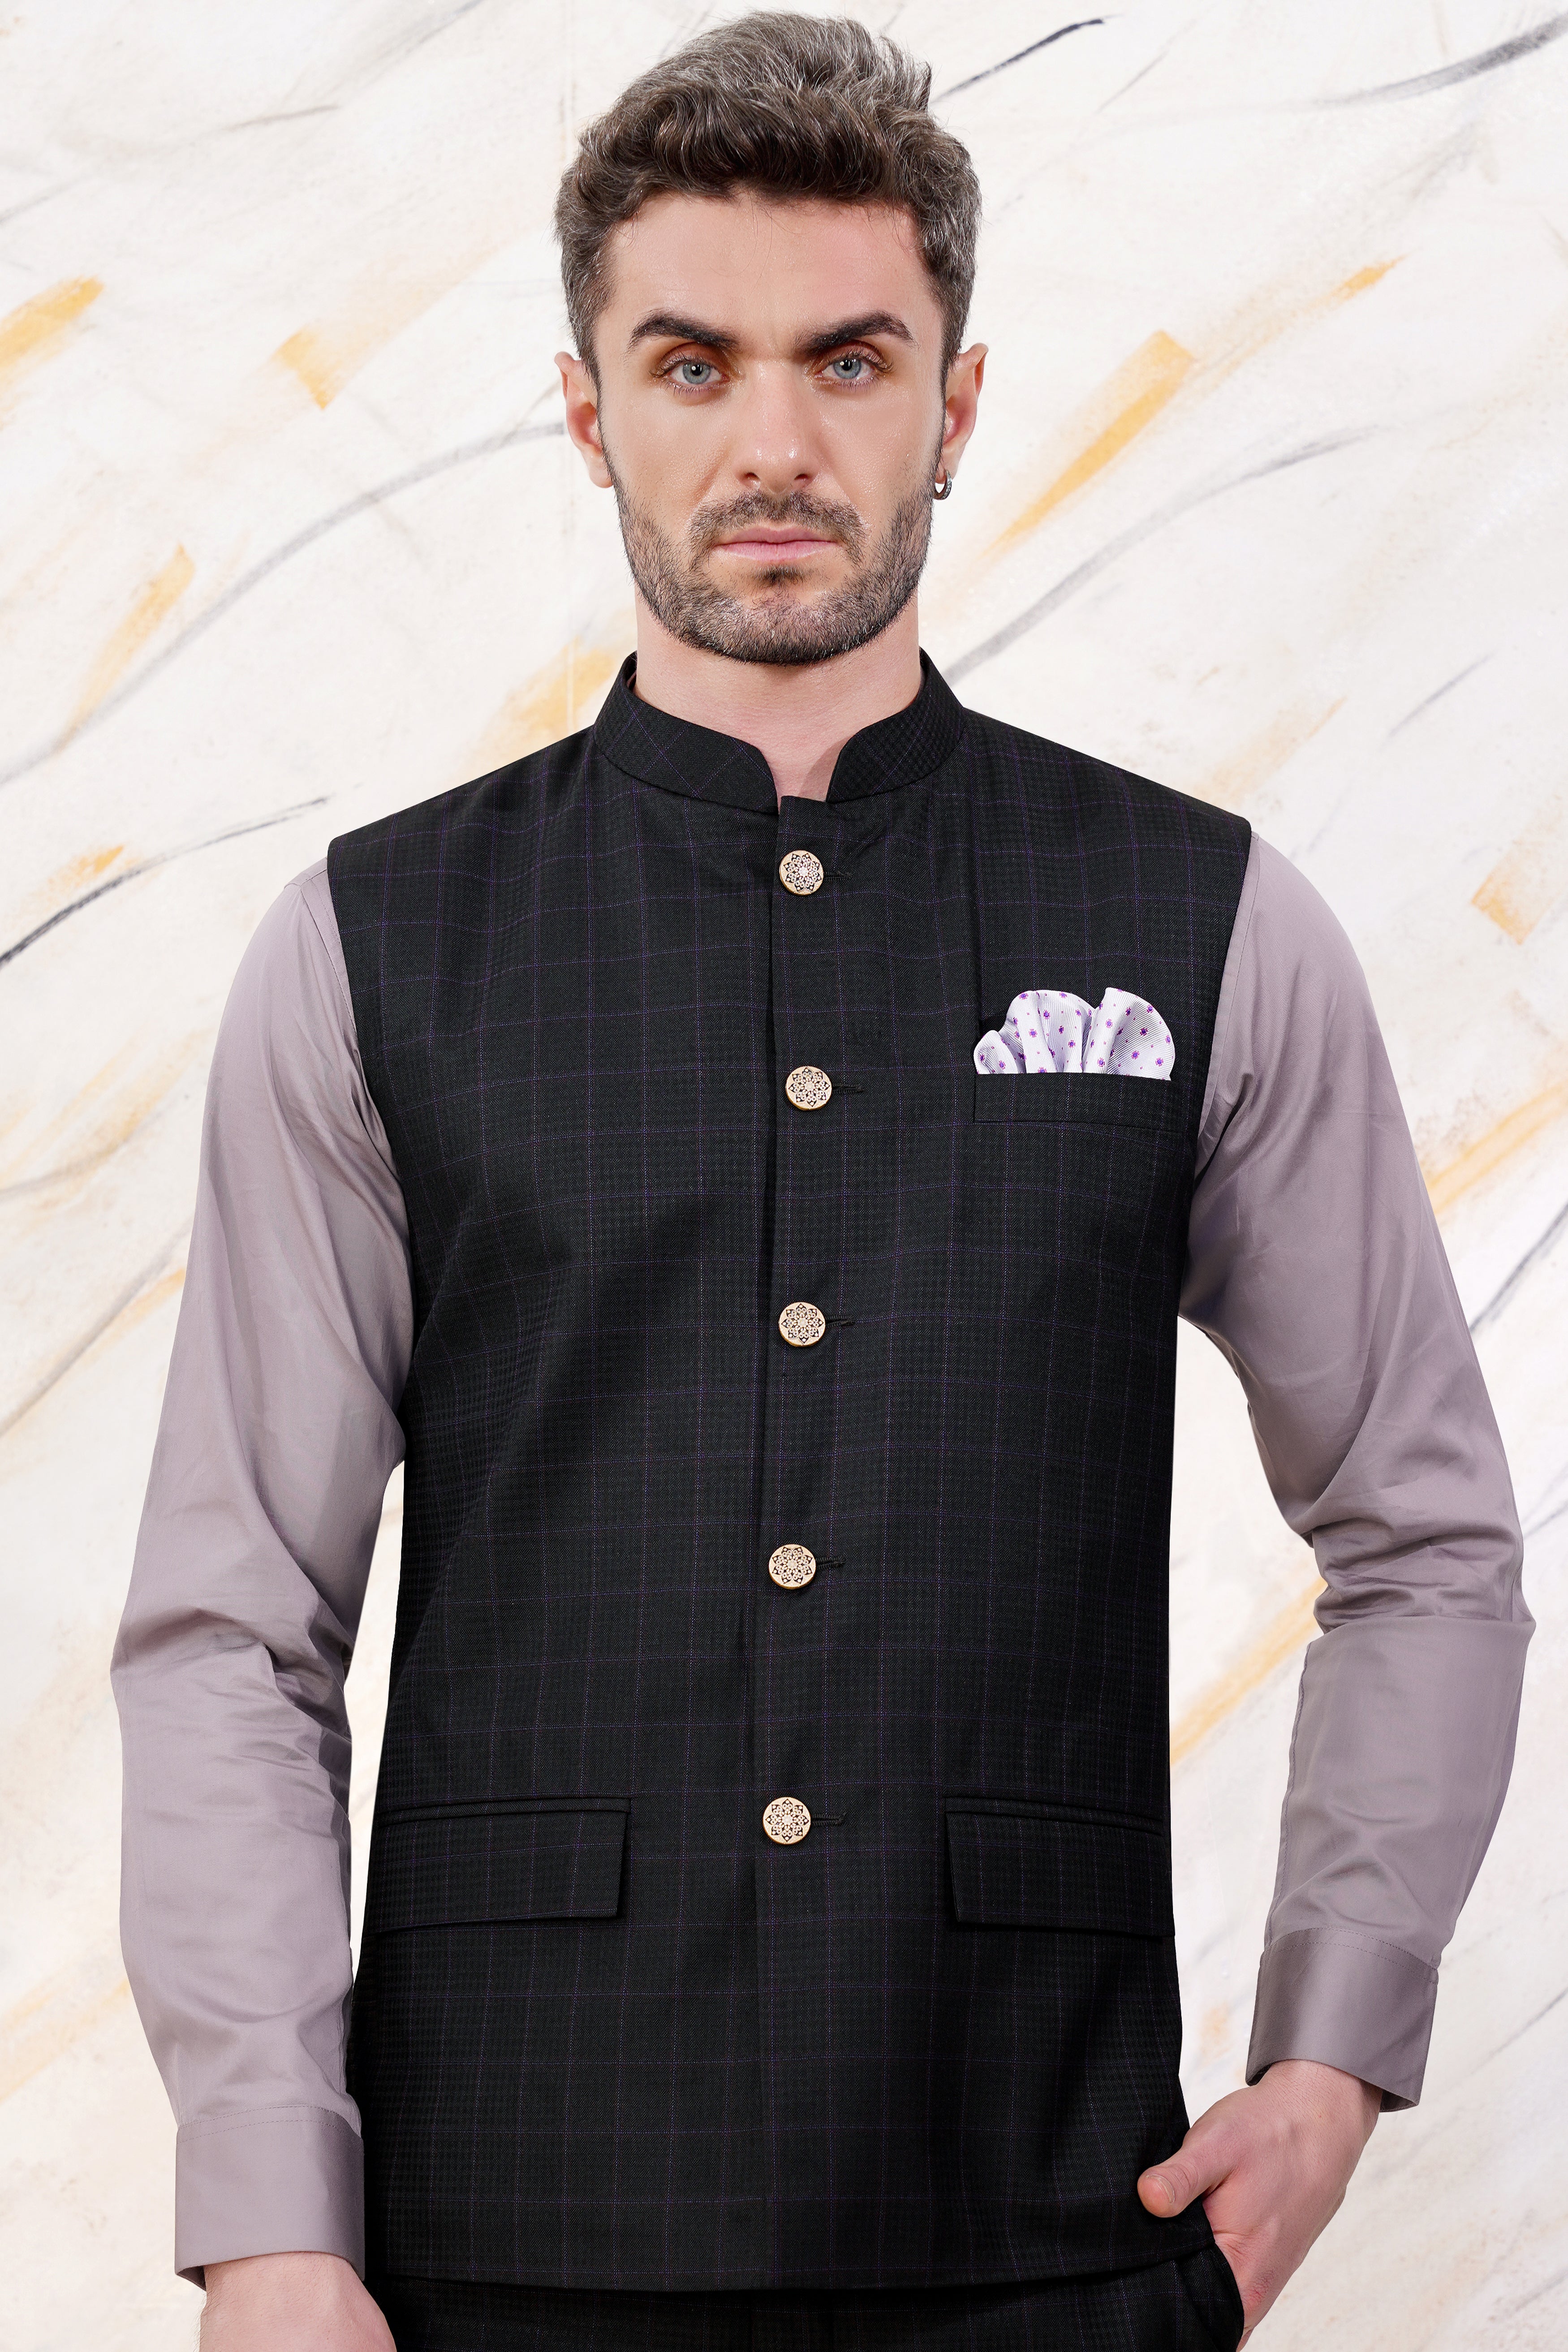 Buy PRINTCULTR Men's Cotton Blend Solid Black Nehru Jacket With White Shirts  (Xl)(Pcsn10003) at Amazon.in